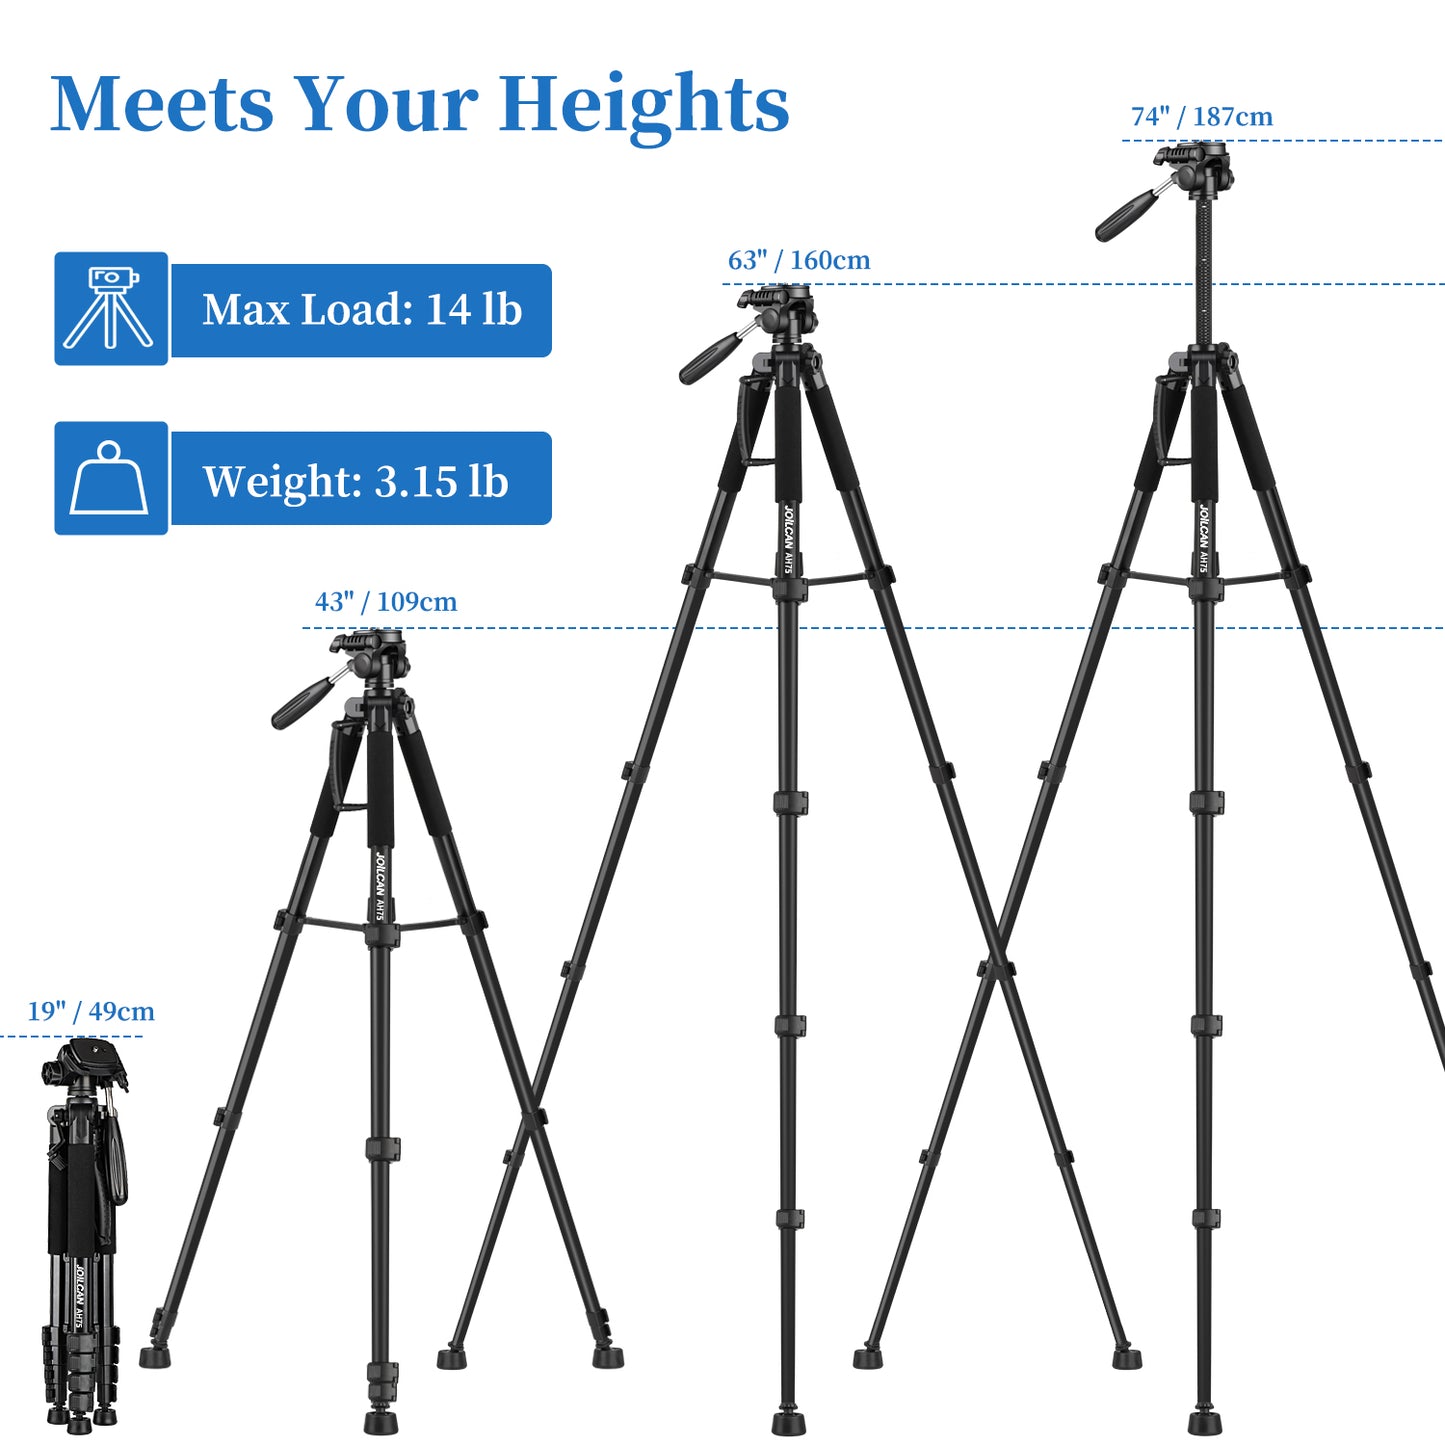 JOILCAN Camera Tripod for Canon Nikon, 74" Lightweight DSLR Tripod Camera Stand with Detachable Head and Universal Phone Mount, Reinforced Aluminum Tall Tripod for Vlog Live Streaming Max Load 14LB(EU)